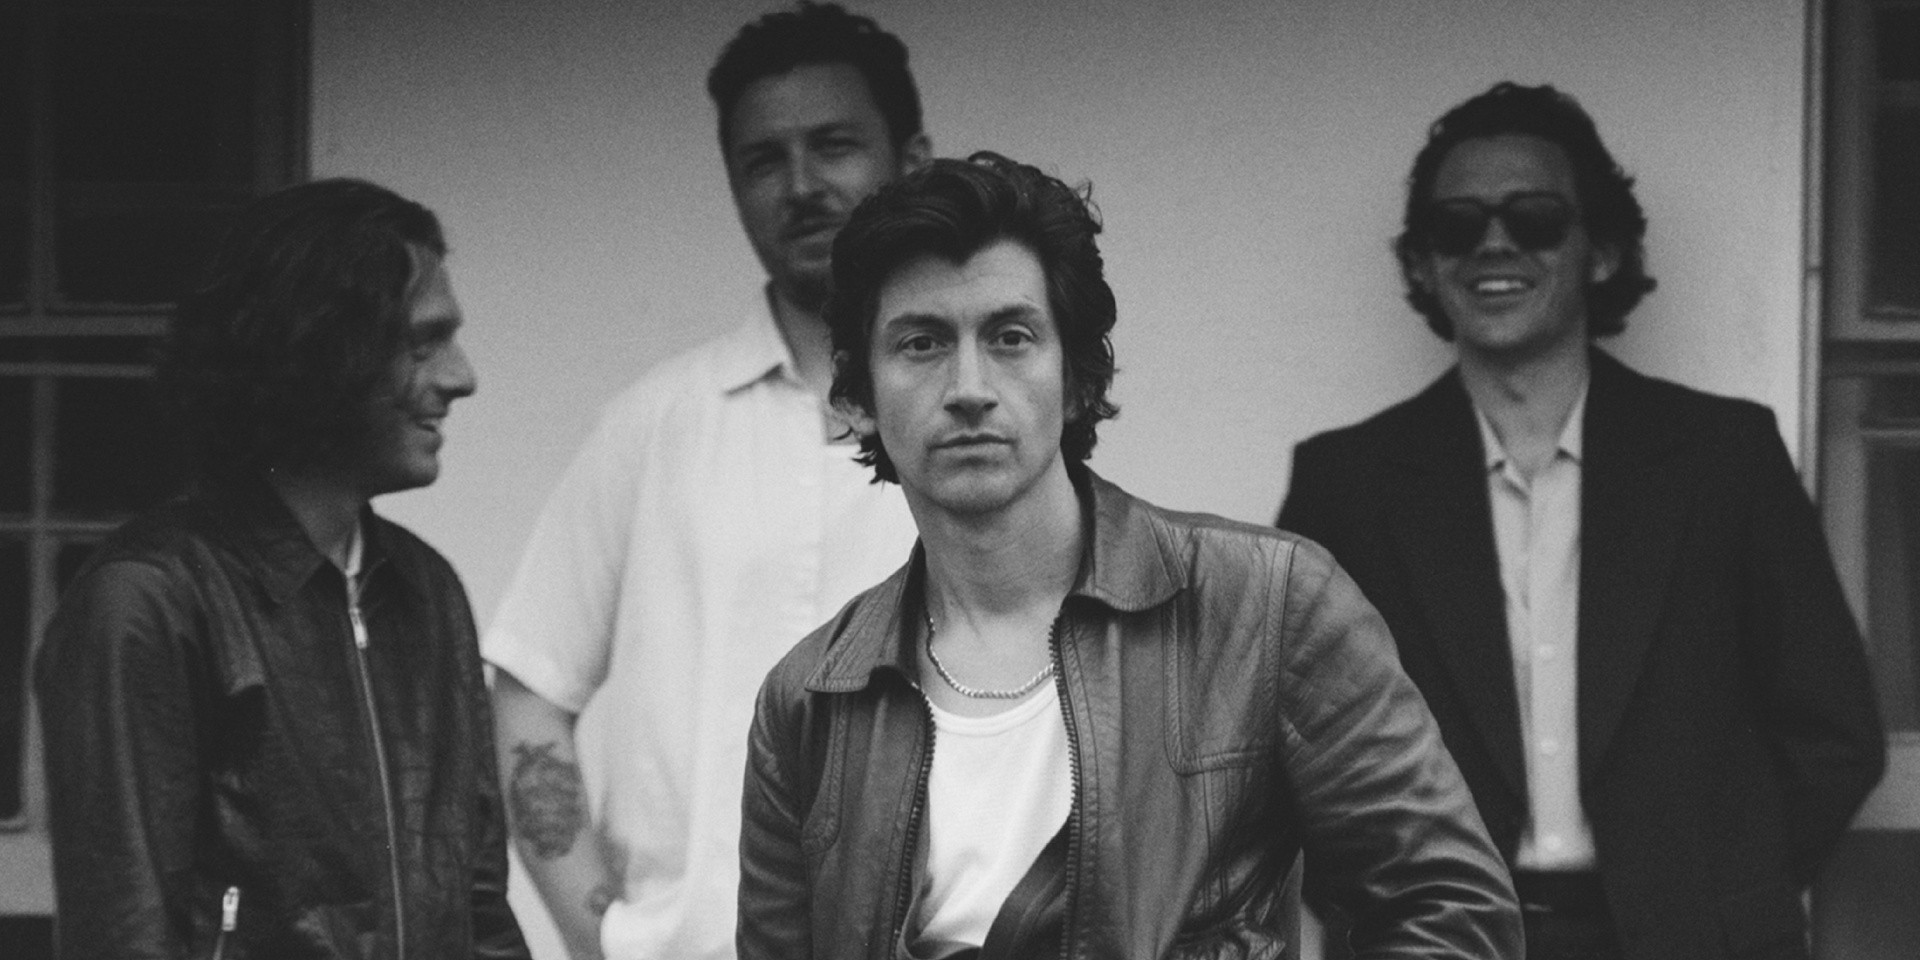 Arctic Monkeys to perform in Singapore in February 2023 